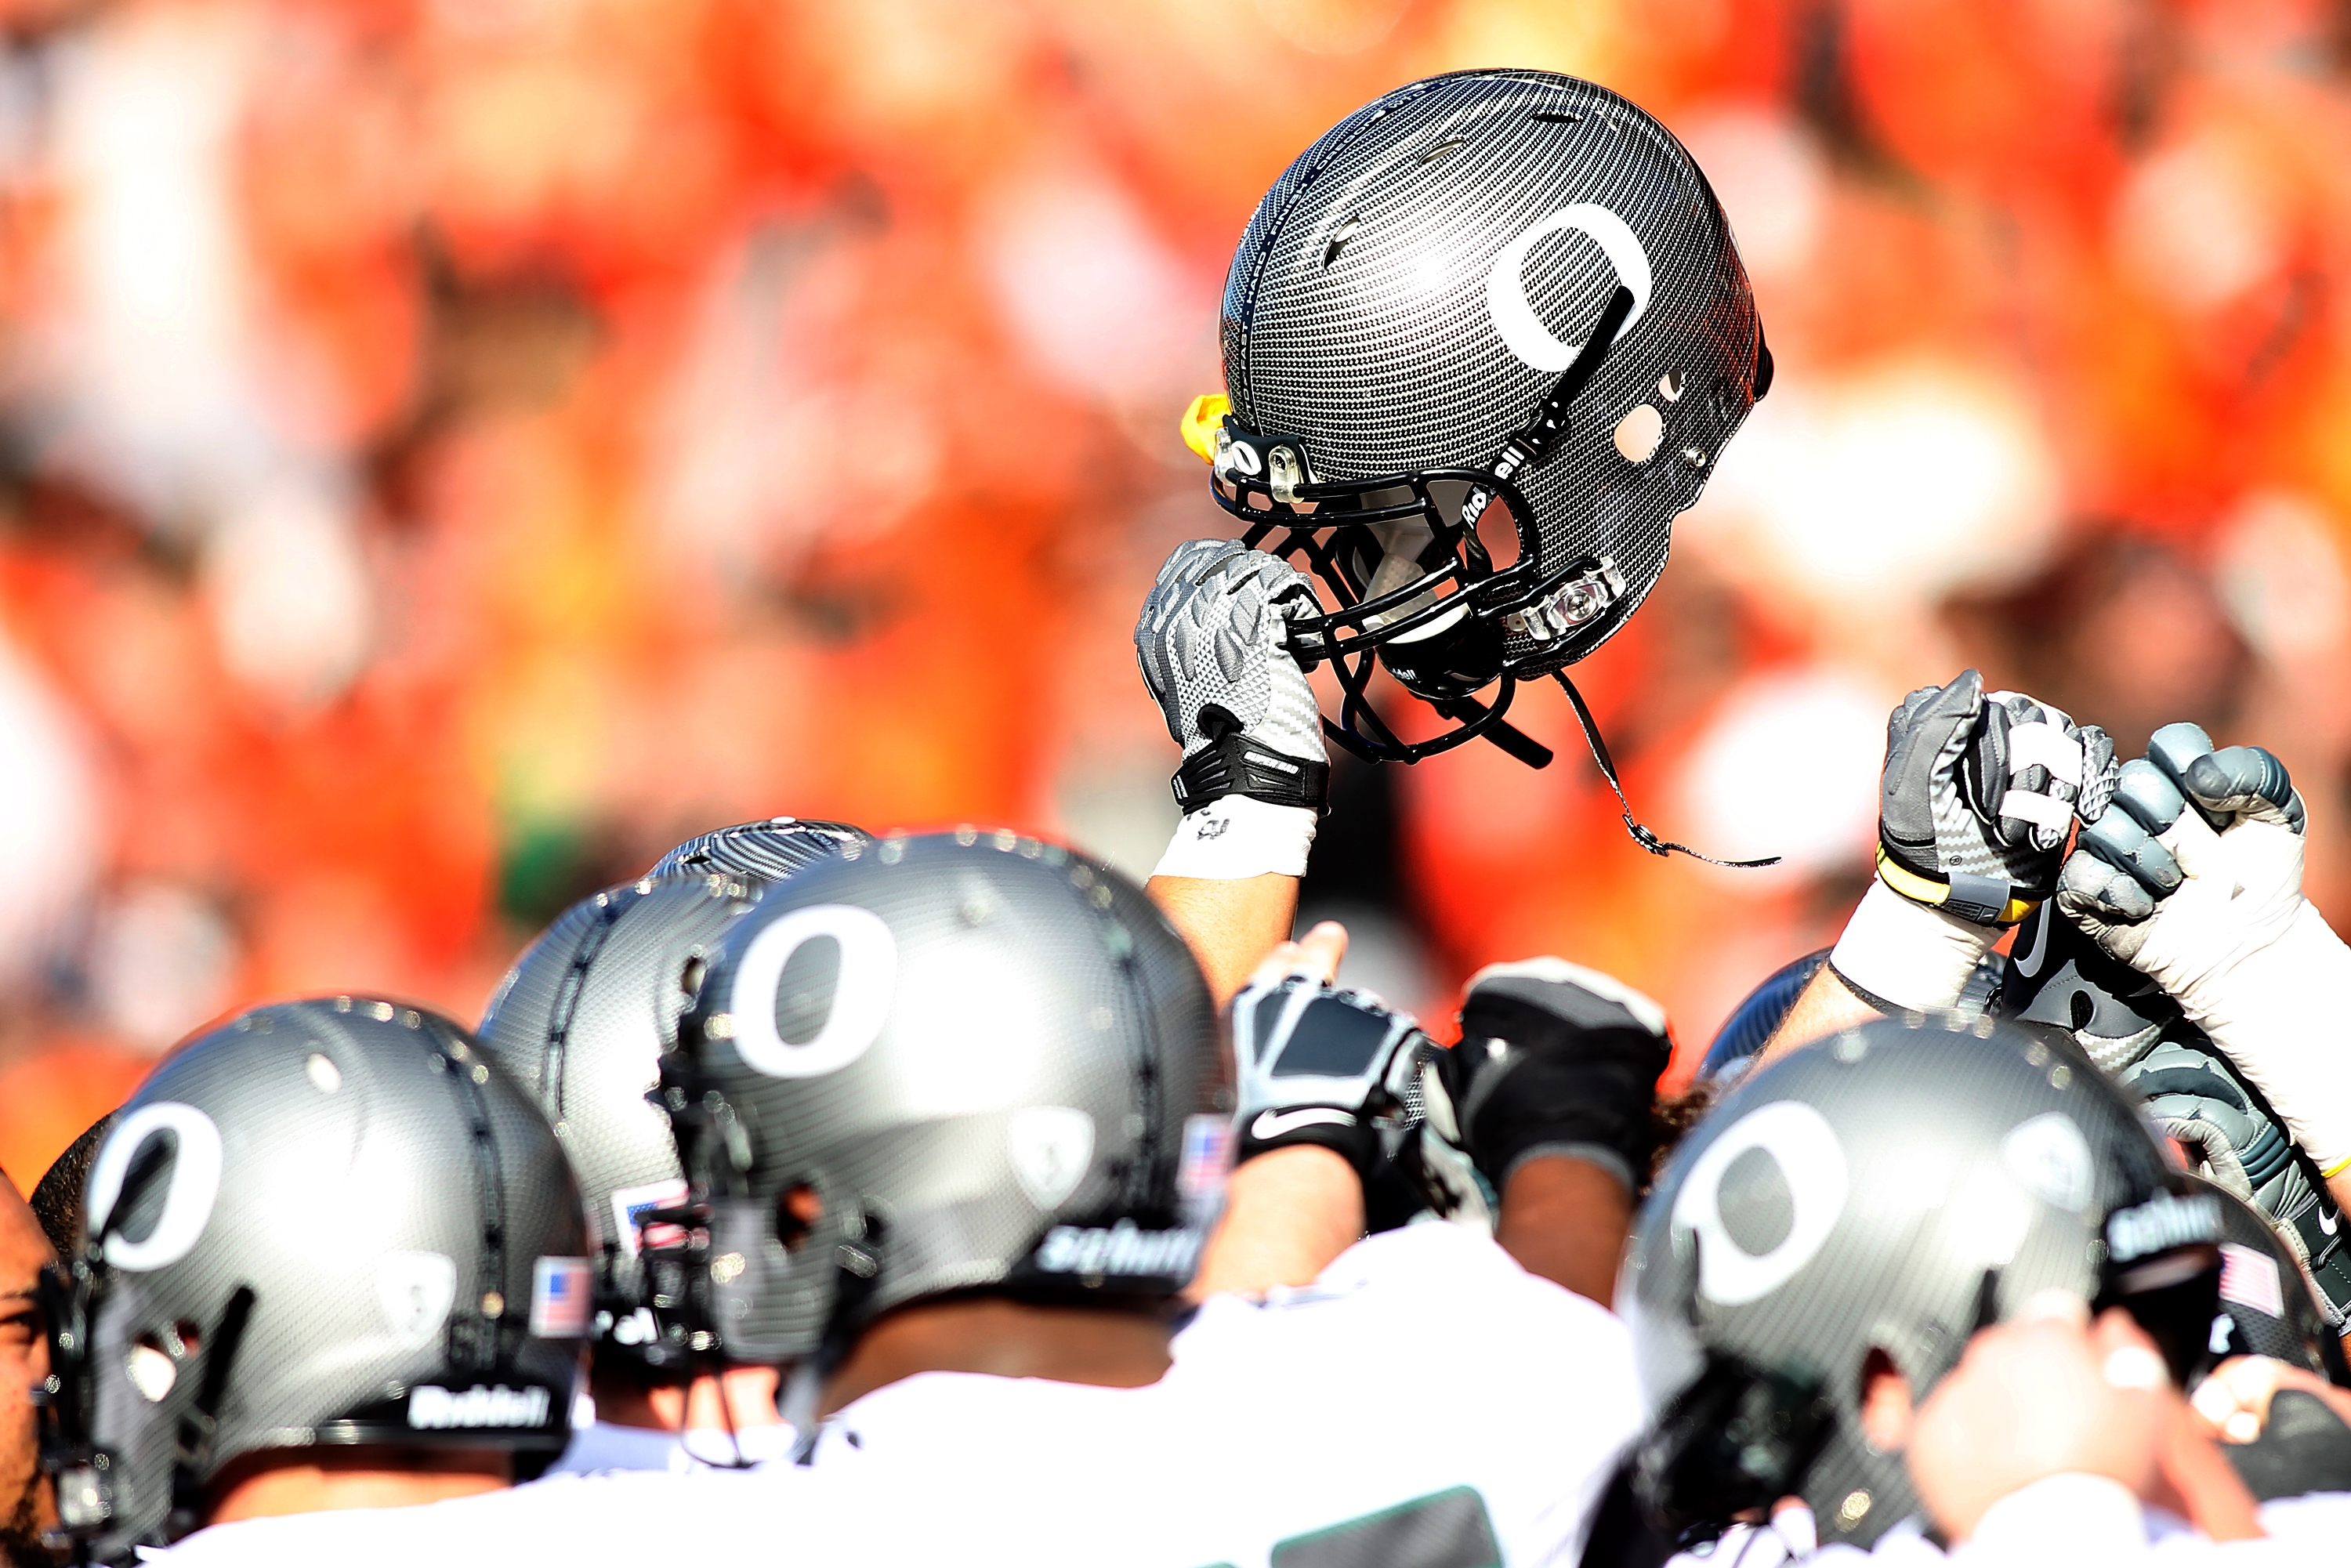 CORVALLIS, OR - DECEMBER 04: The Oregon Ducks hold their helmets high before the game against  the Oregon State Beavers during the 114th Civil War on December 4, 2010 at the Reser Stadium in Corvallis, Oregon.  (Photo by Jonathan Ferrey/Getty Images)